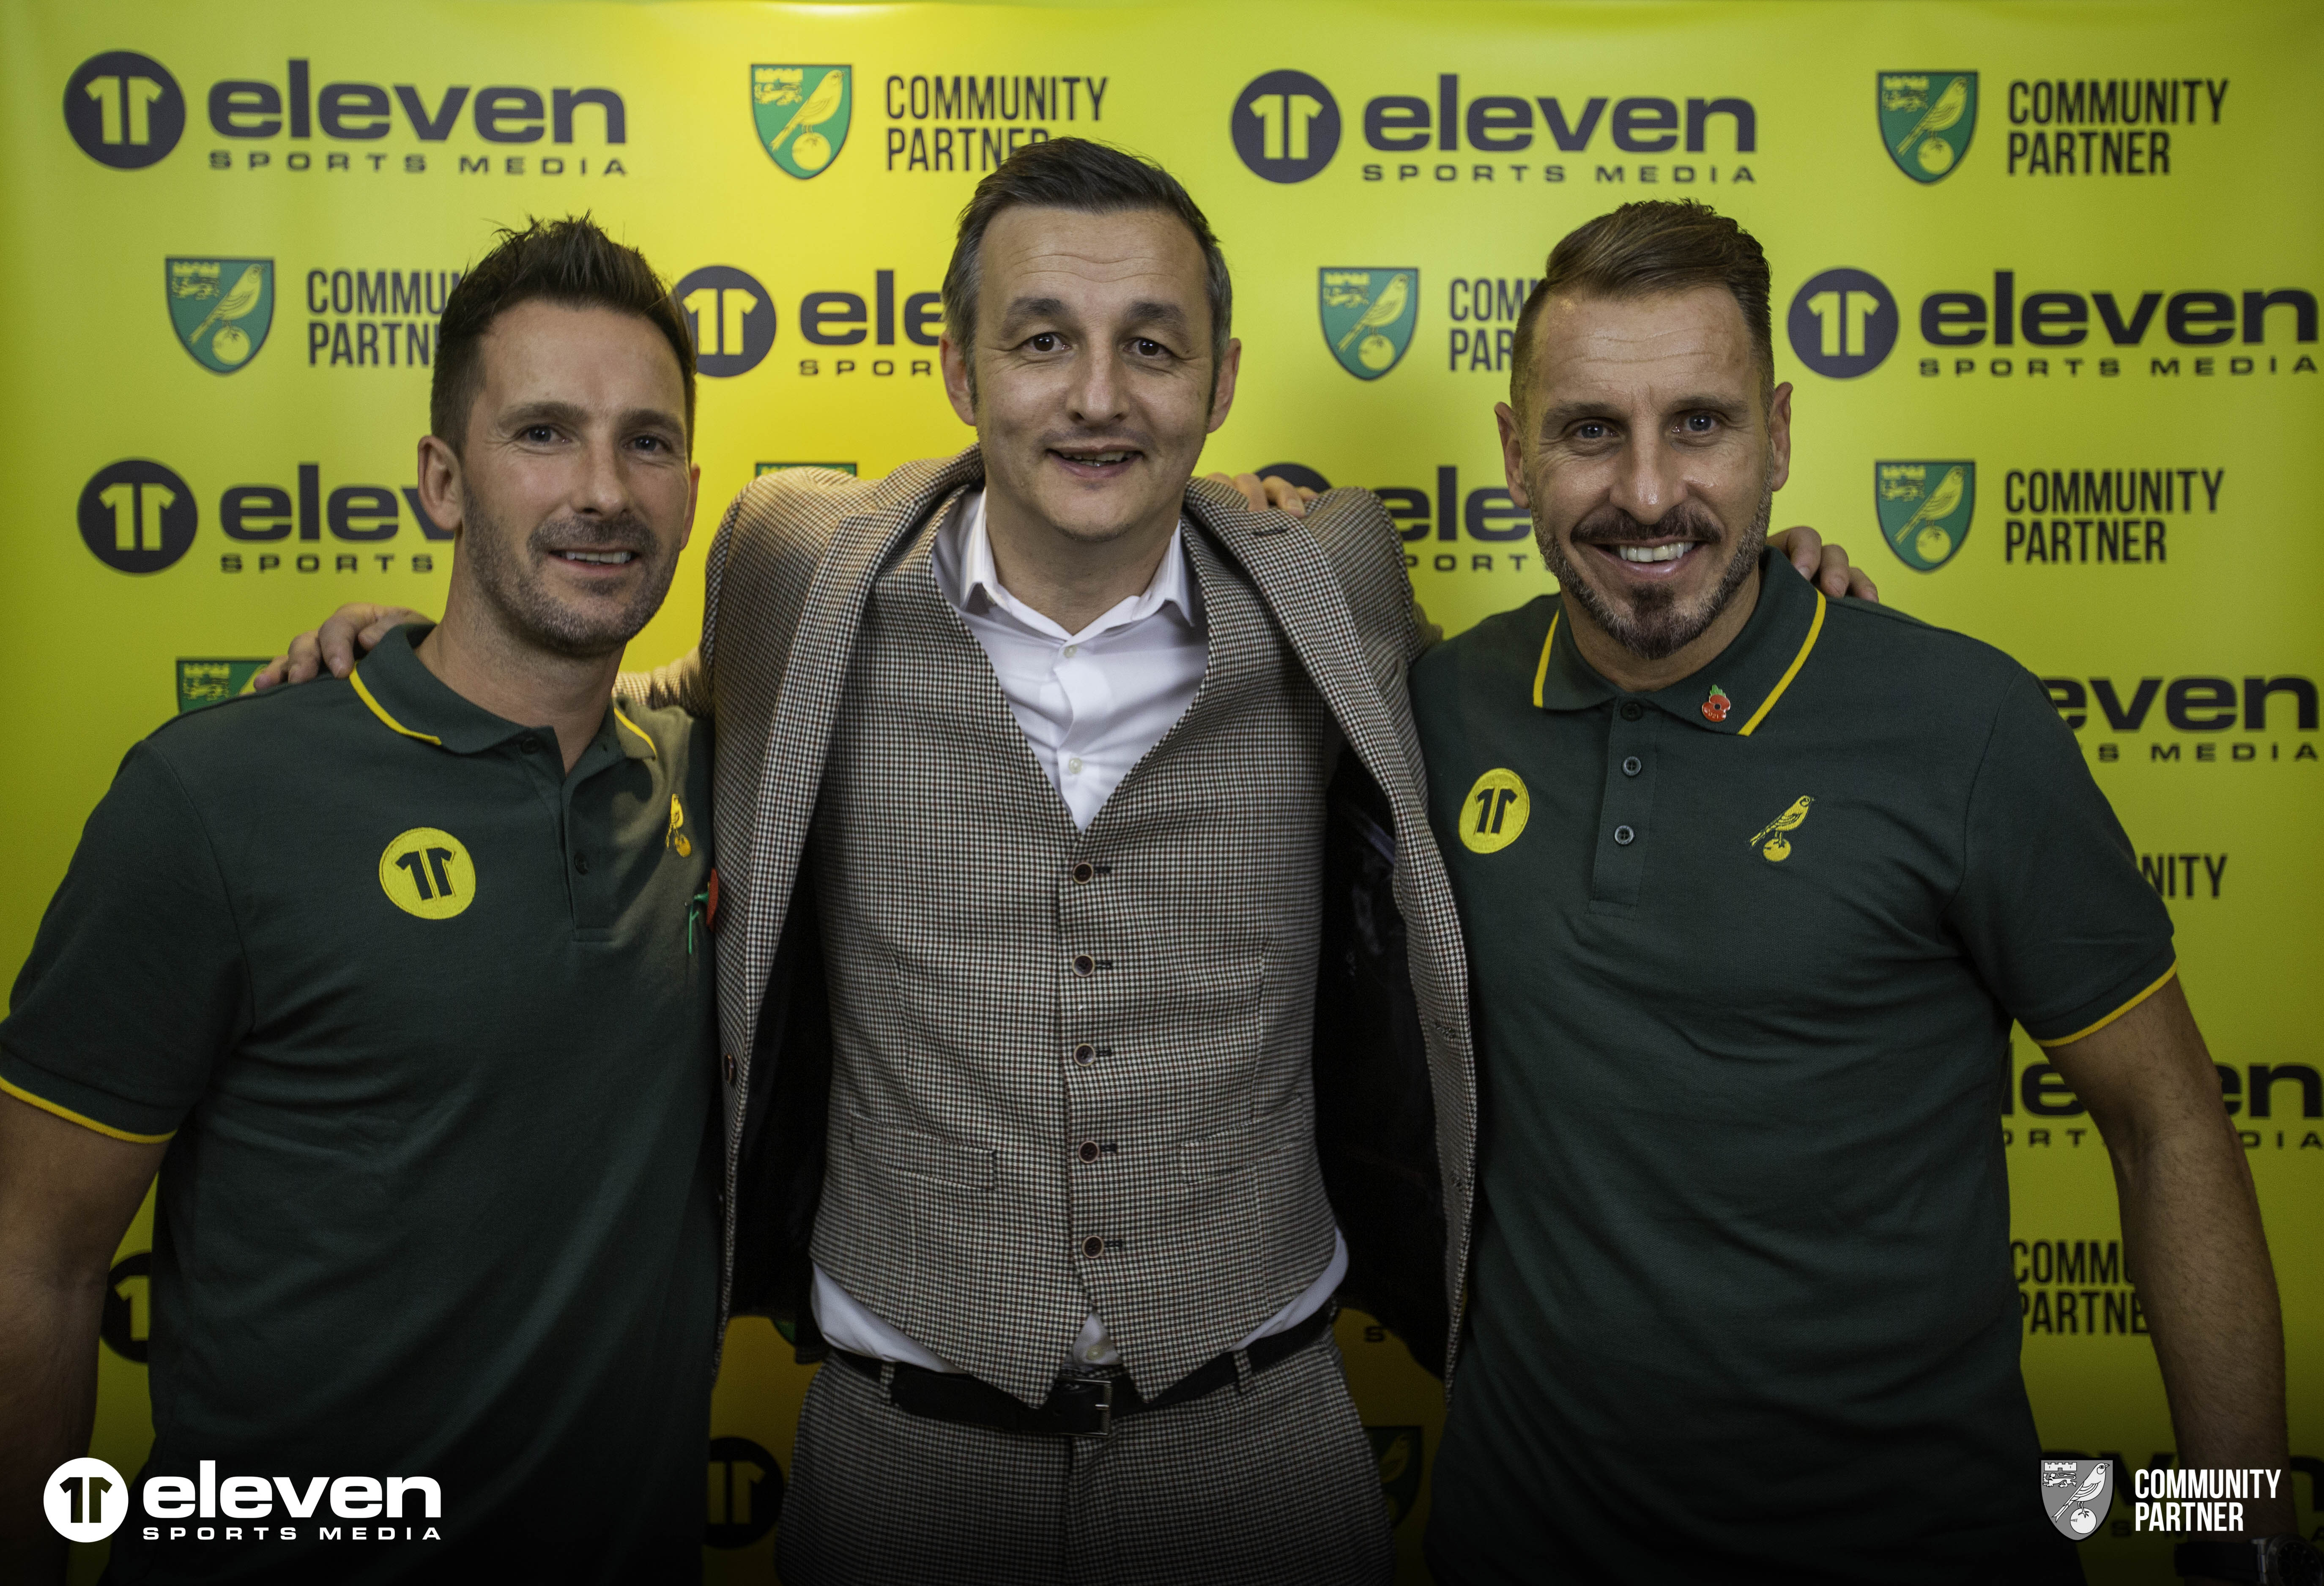 Our fantastic first Norwich City Community Partner event with Eleven Sports Media